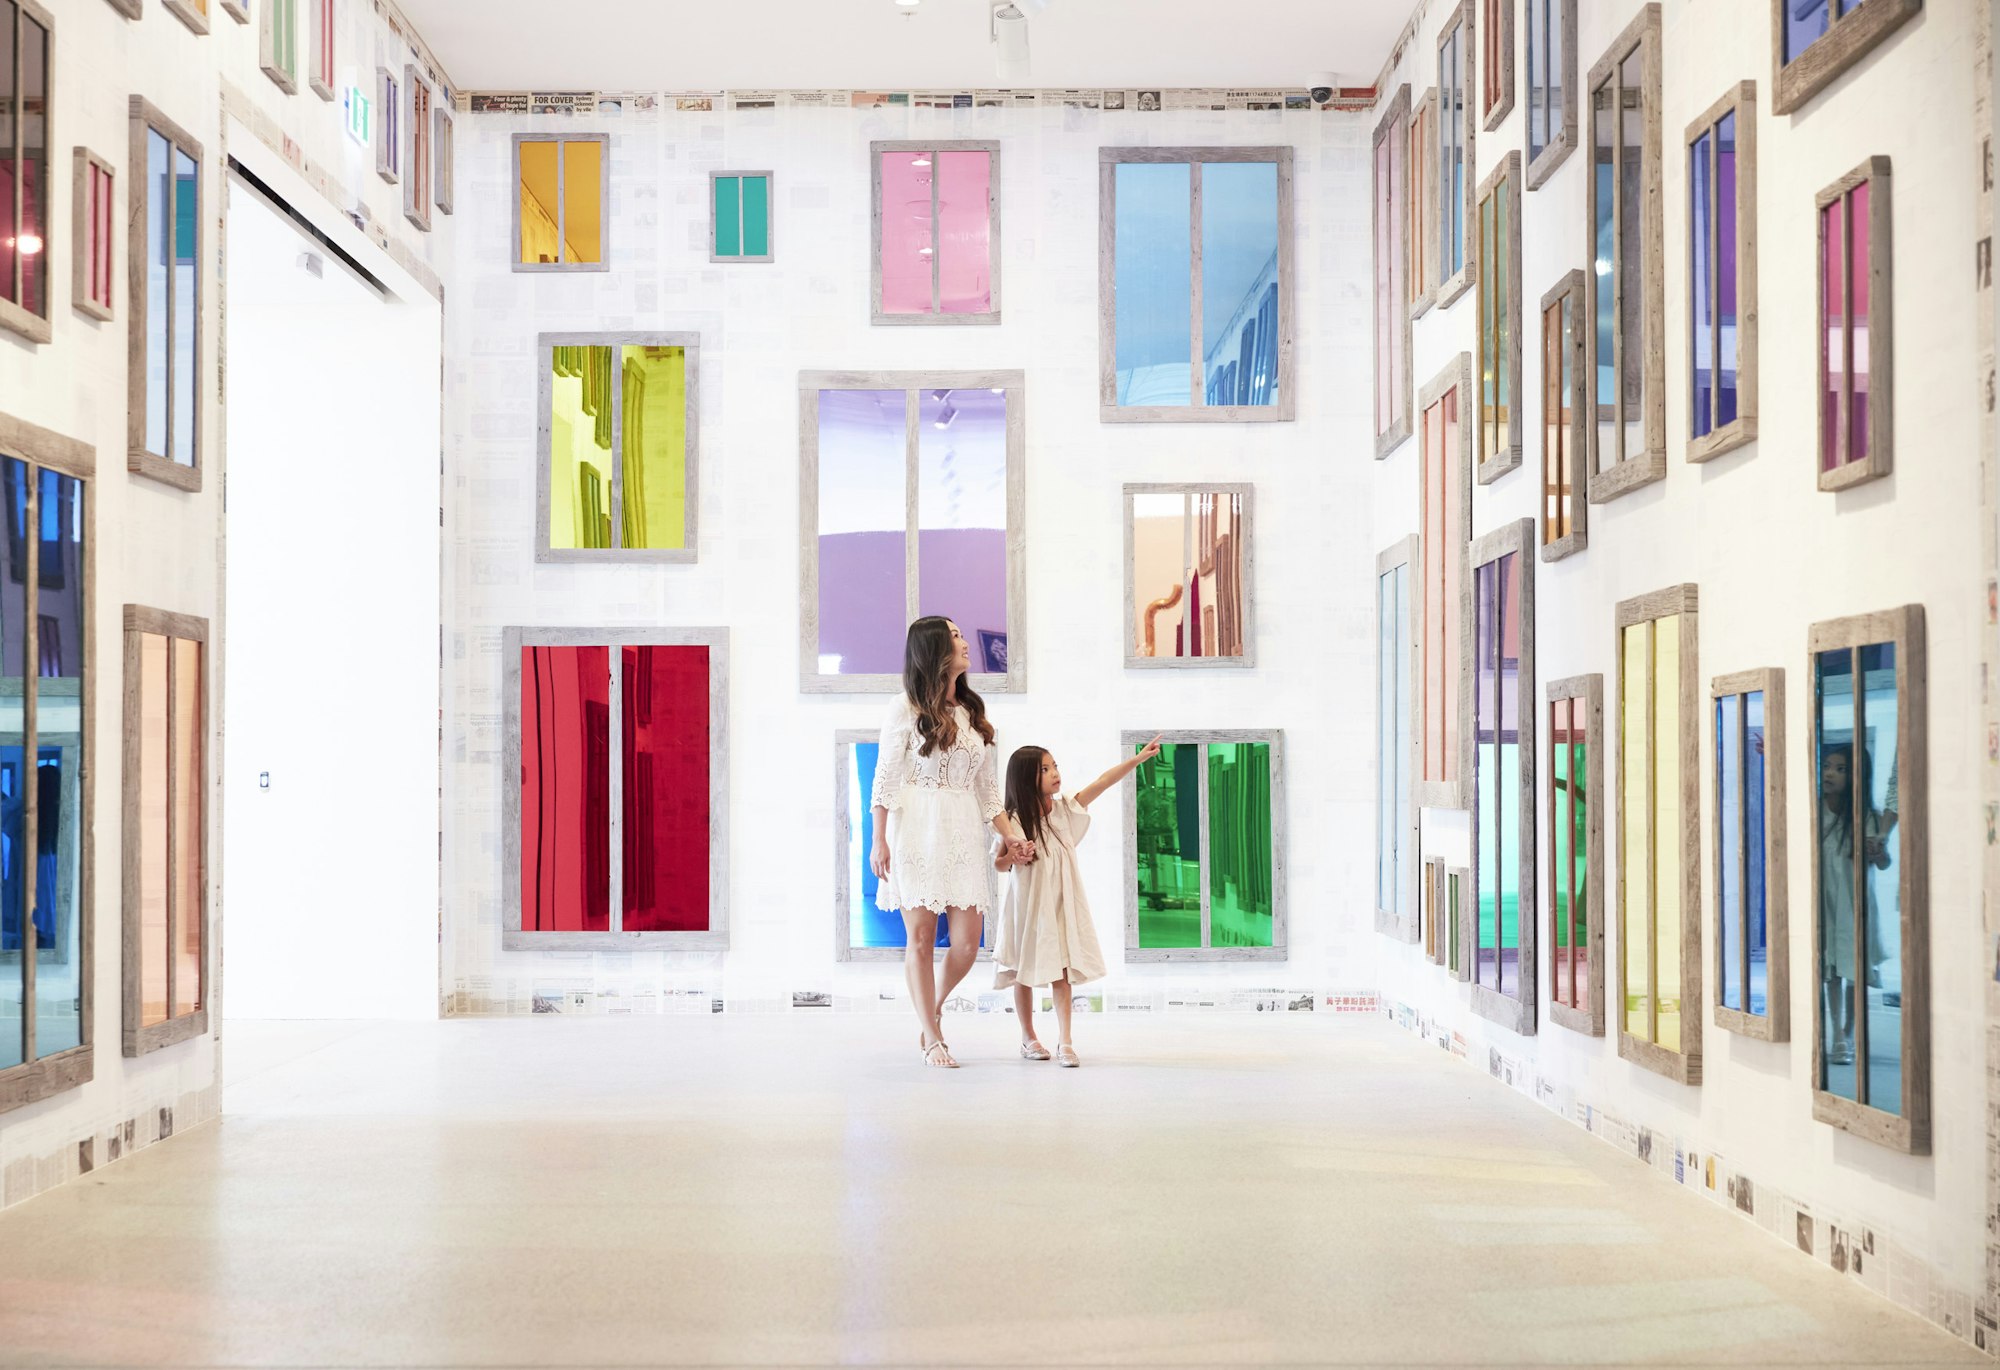 An adult and a child in a room full of coloured mirror-like windows